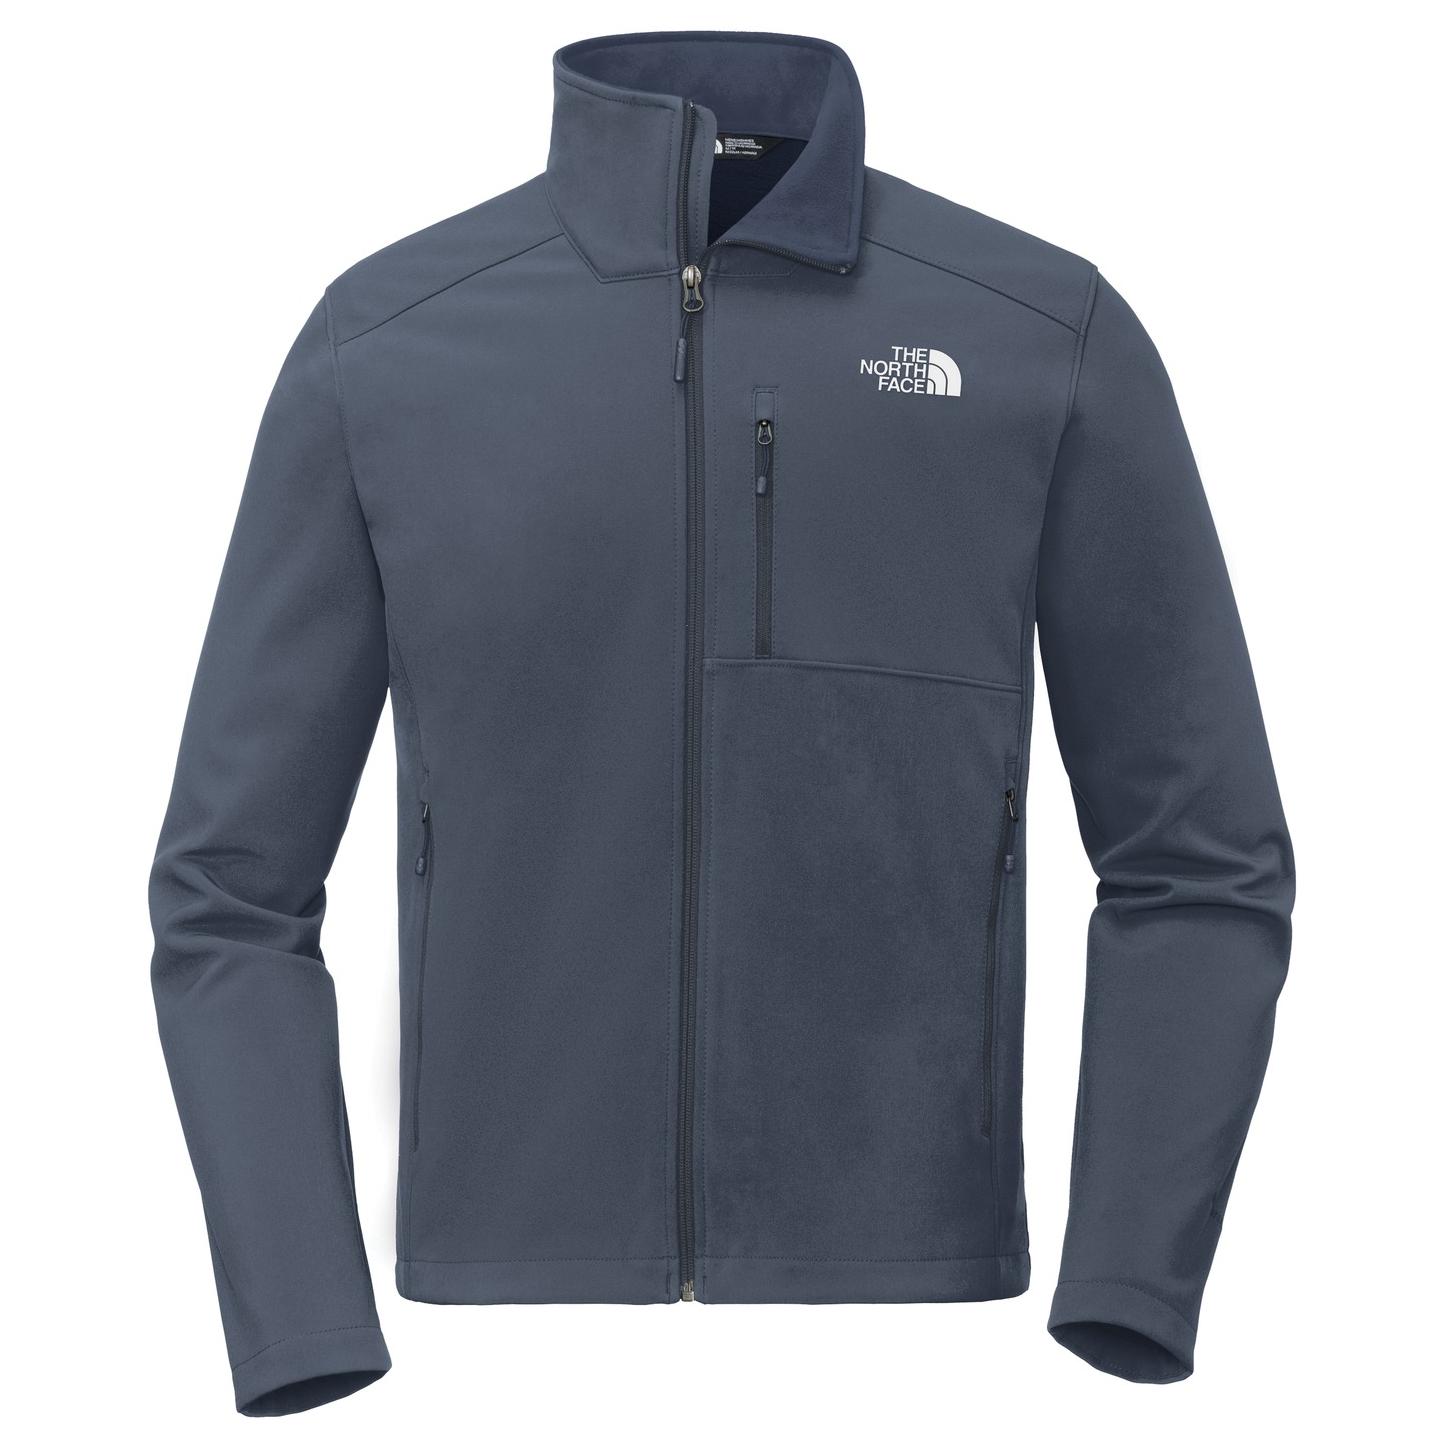 The North Face NF0A3LGT Apex Barrier Soft Shell Jacket - Urban Navy ...